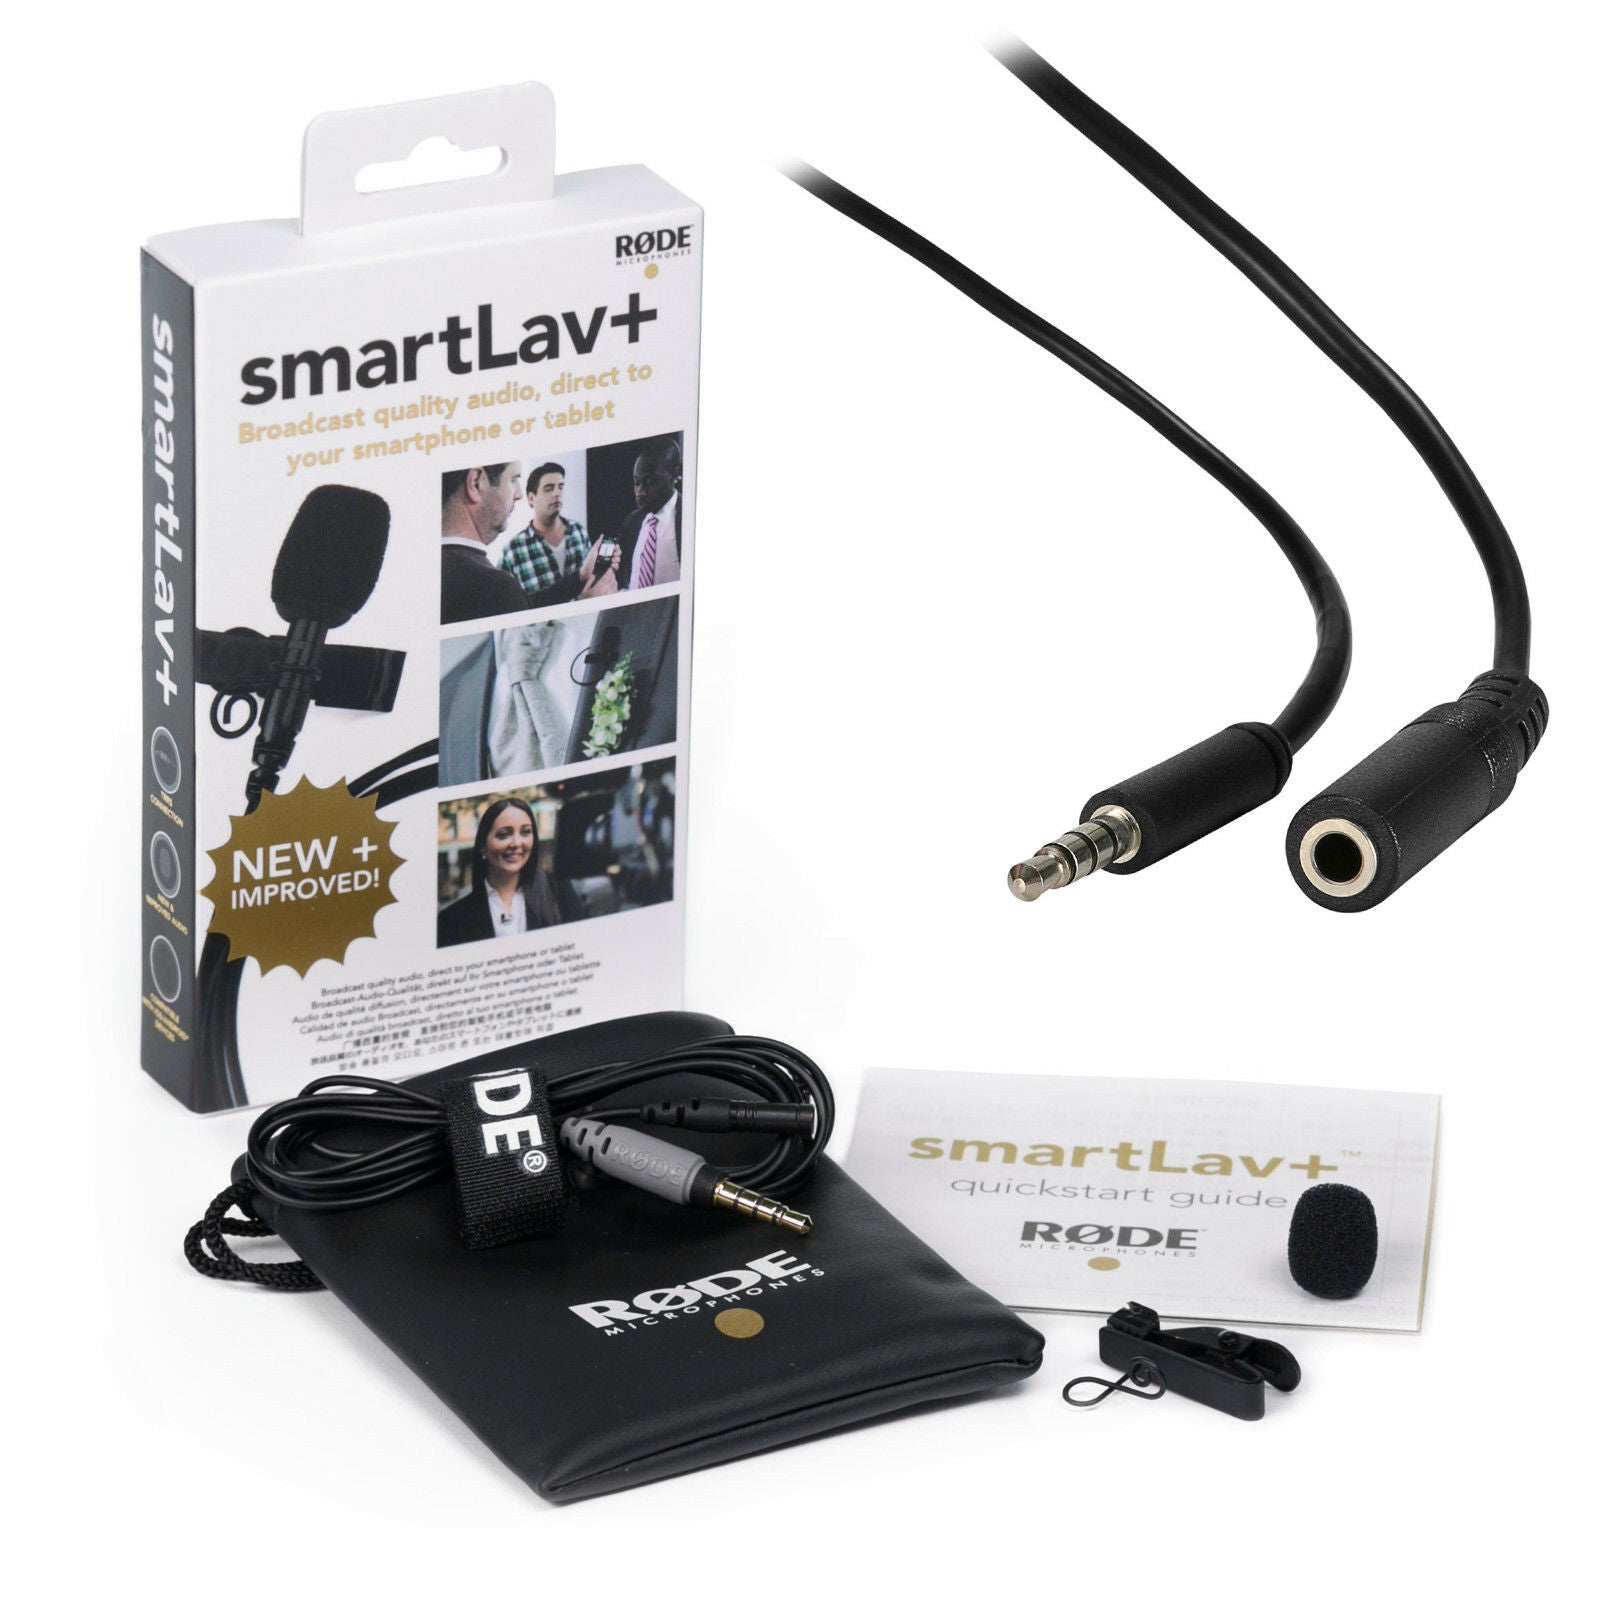 RODE smartLav+ Lavalier Microphone with 2m Extension Cable